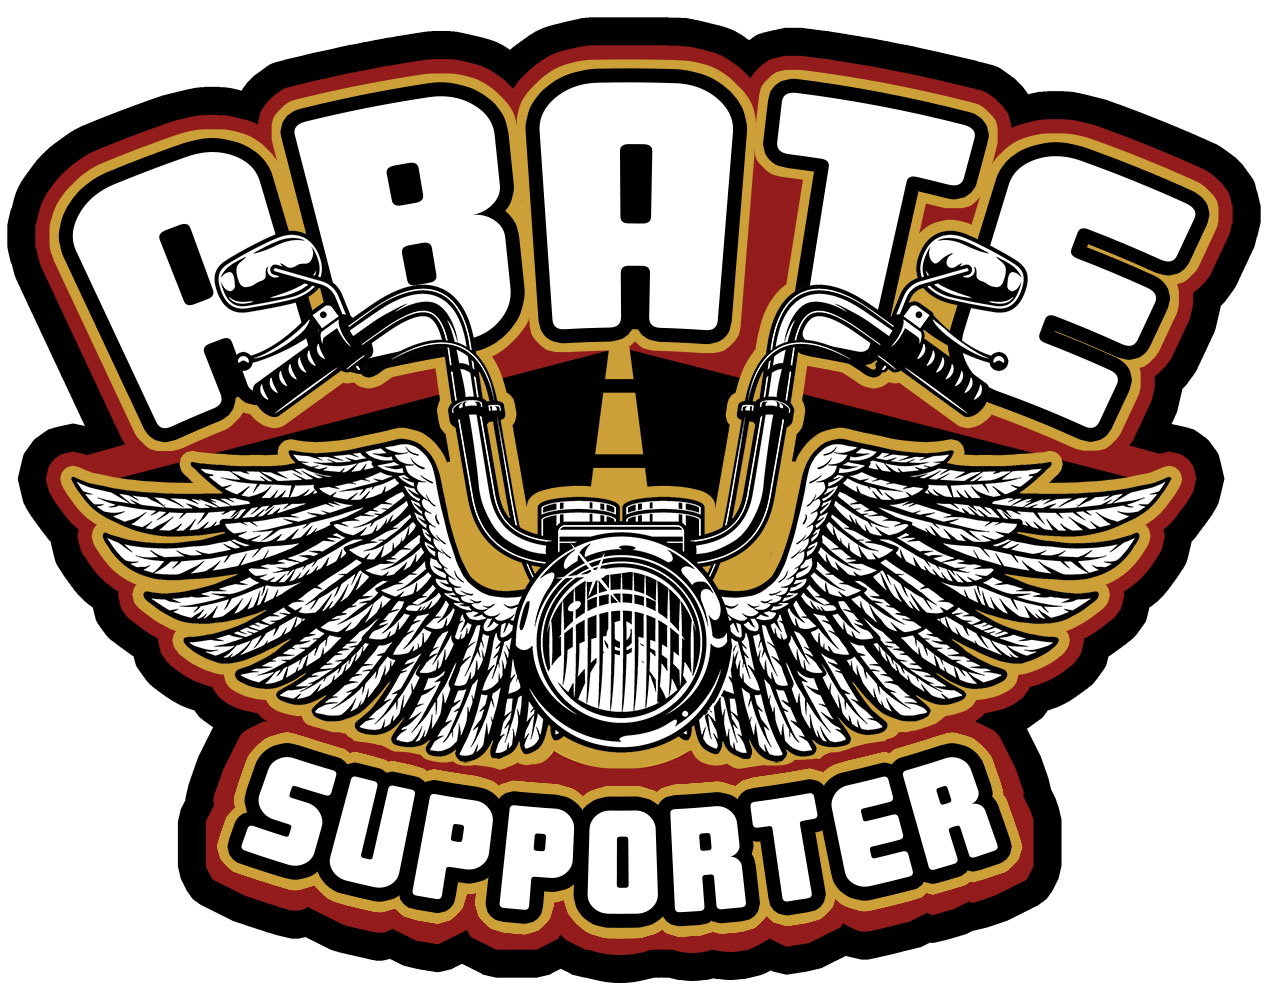 ABATE Supporter Road Sticker